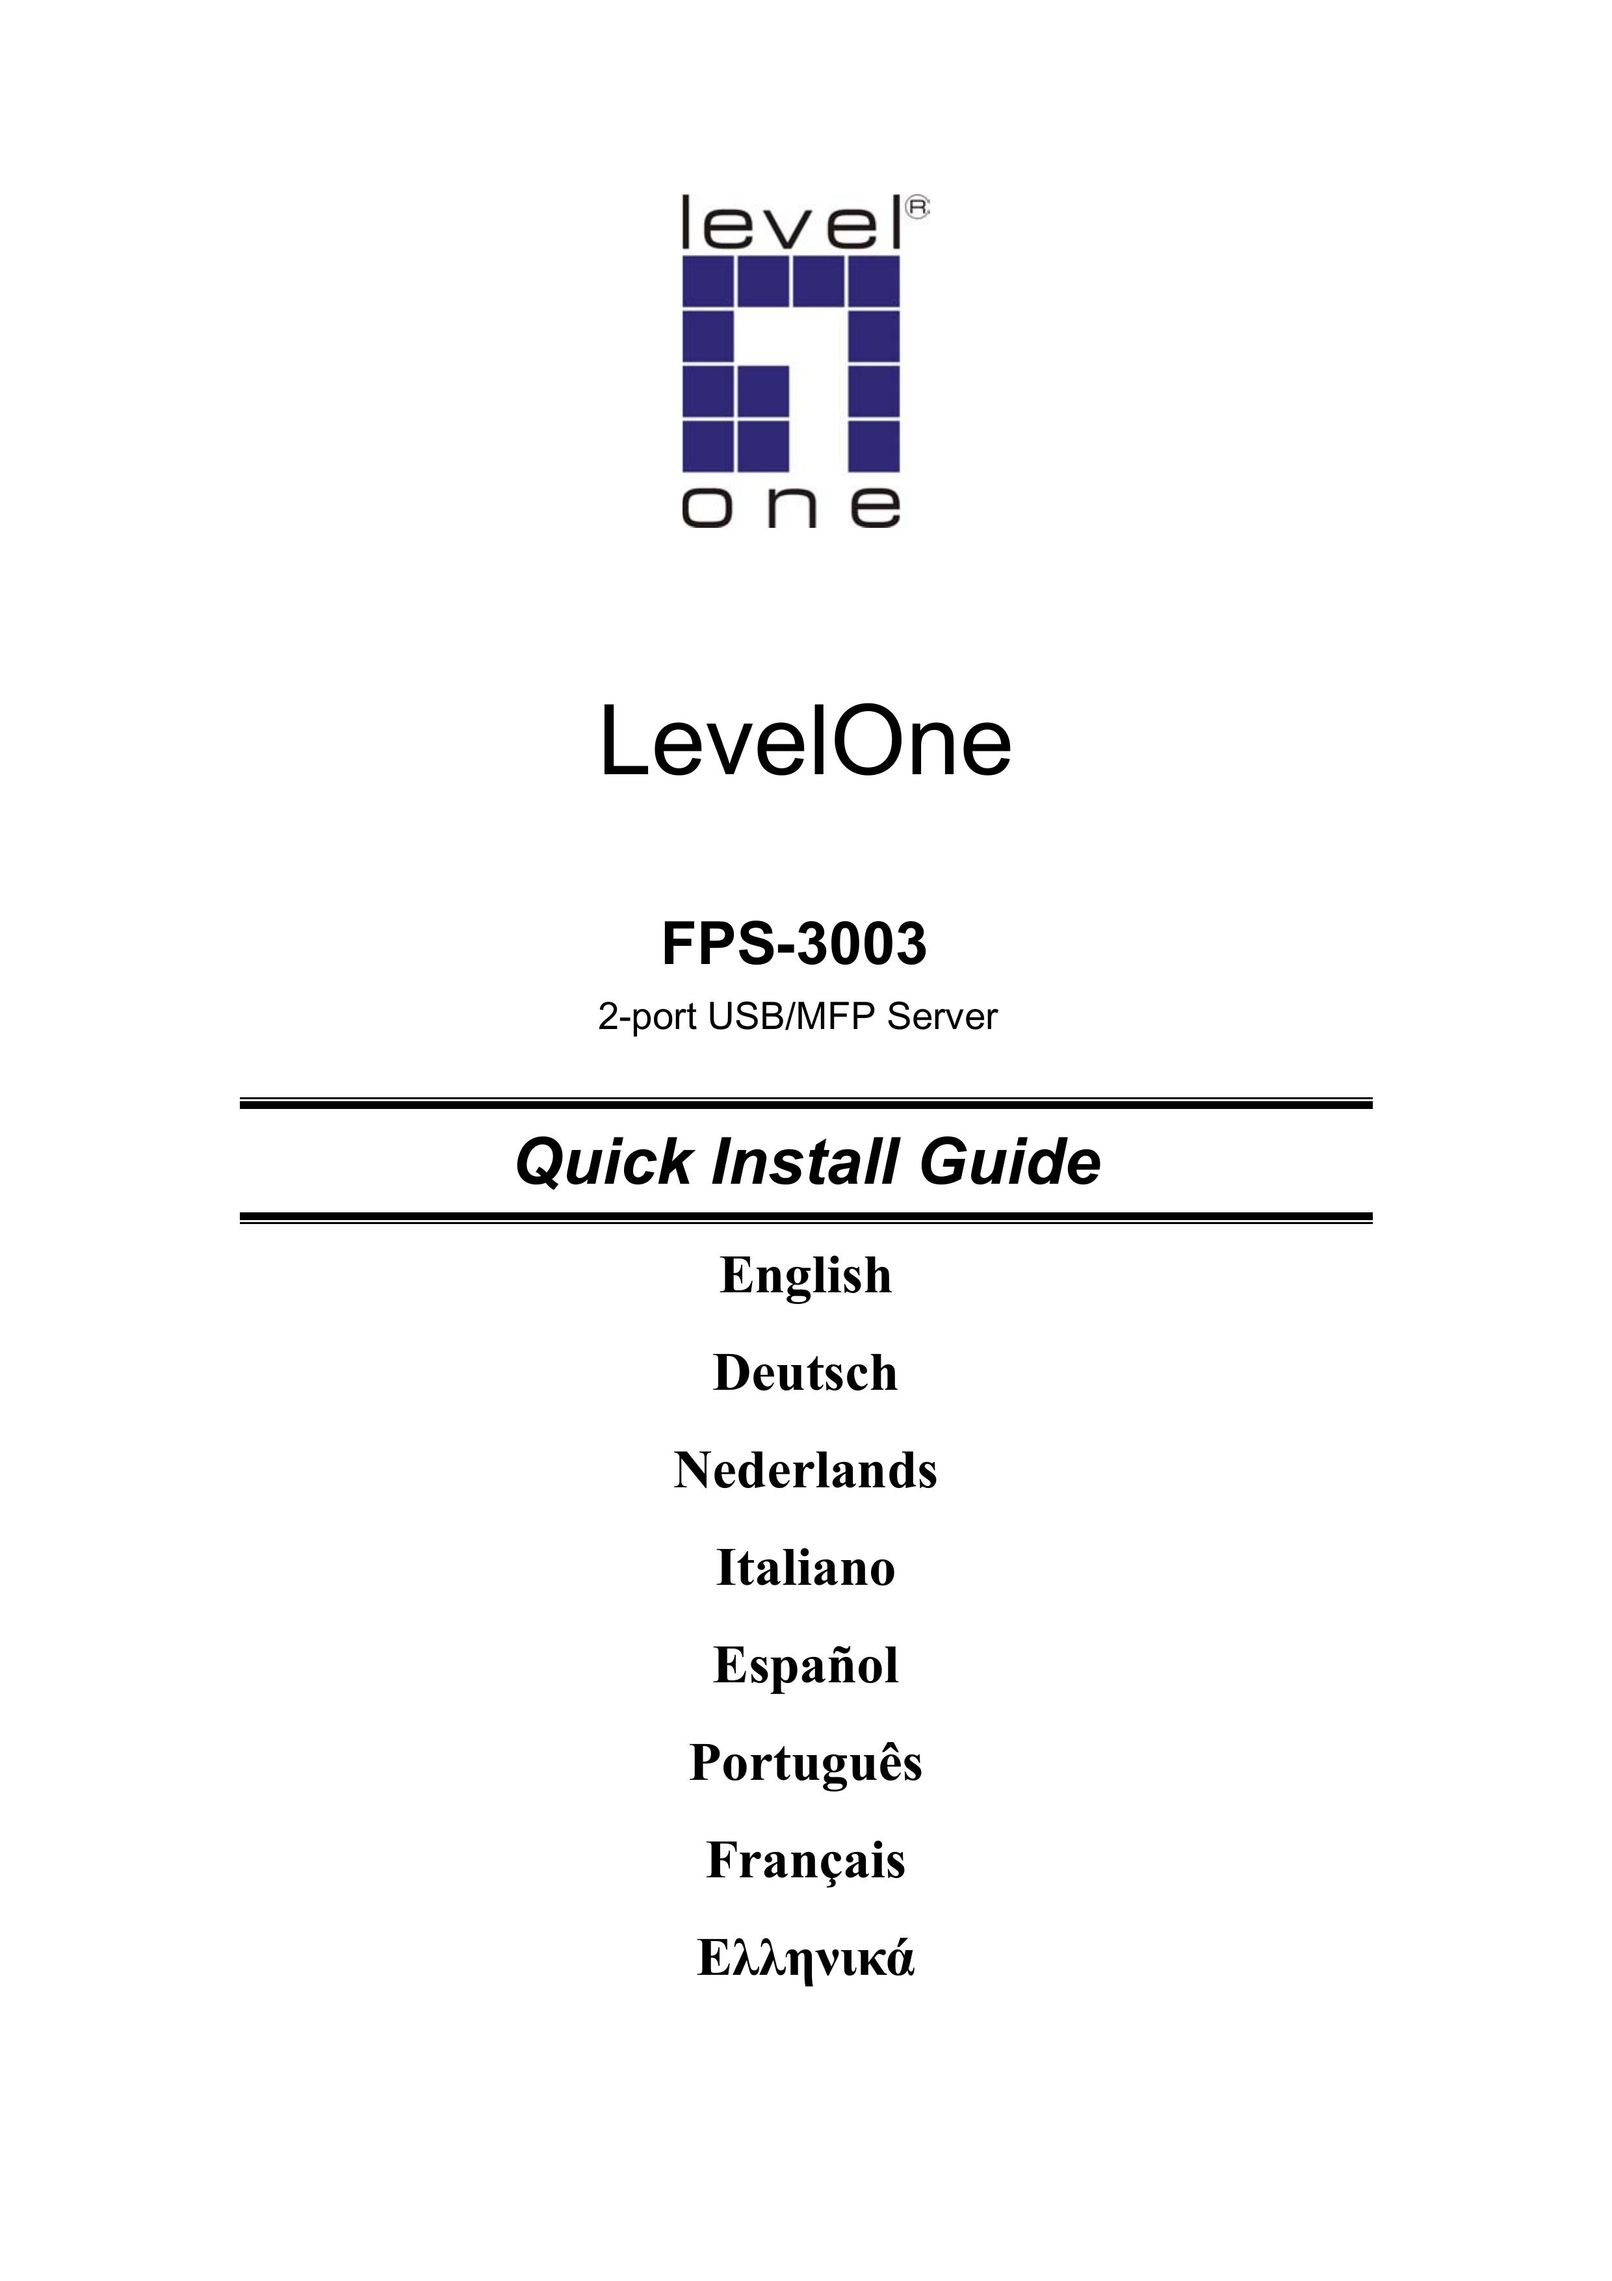 LevelOne FPS-3003 Network Card User Manual